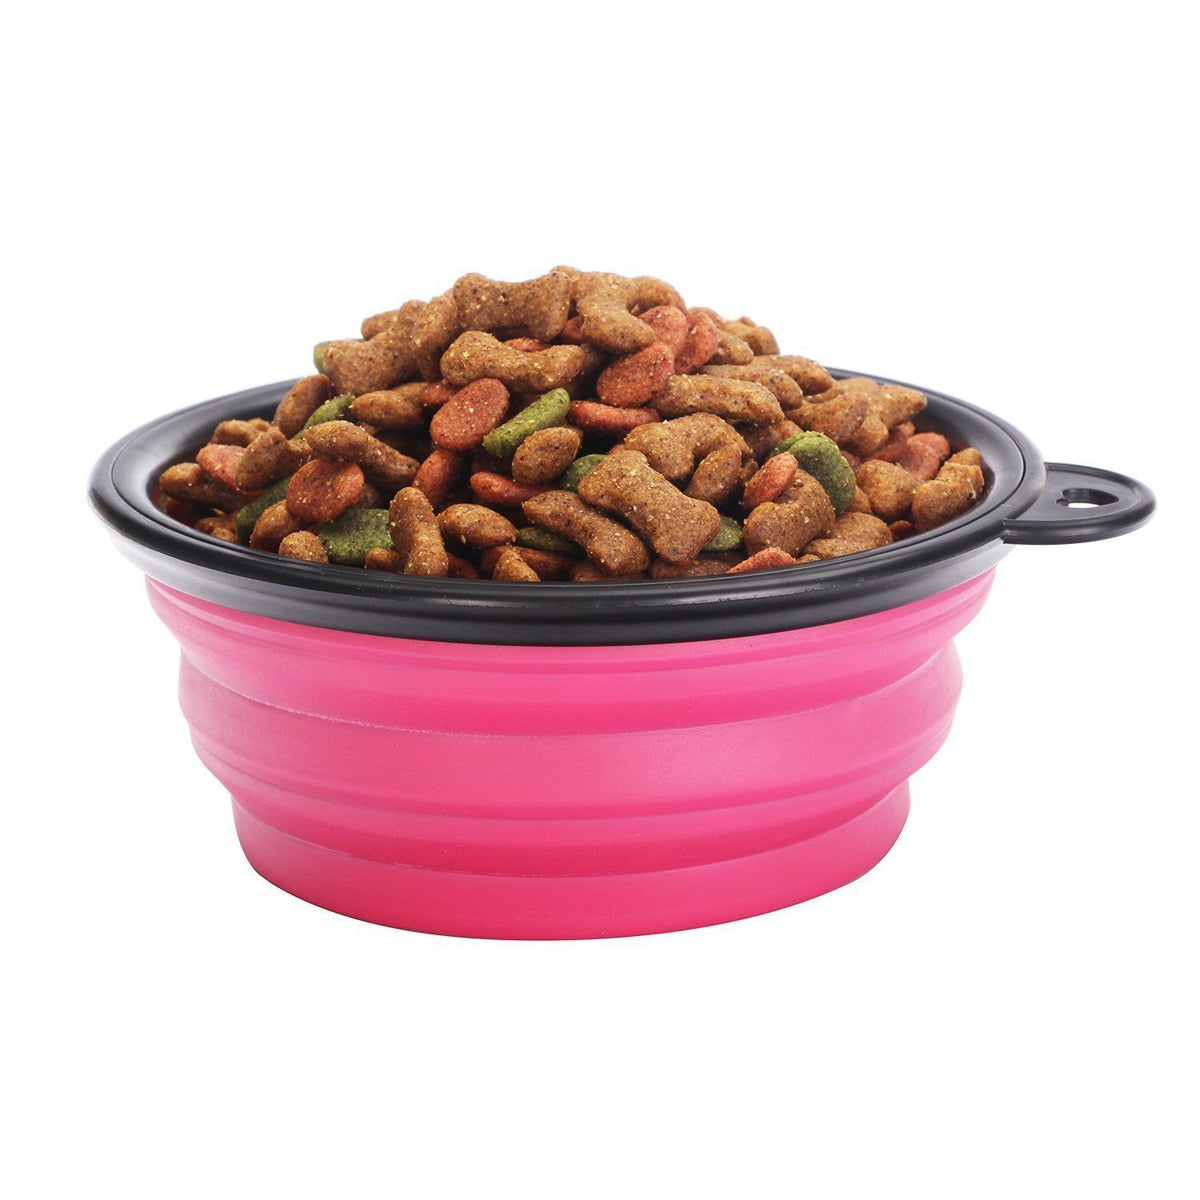 Collapsible Pet Bowl for Food & Water - Badger Survival Online